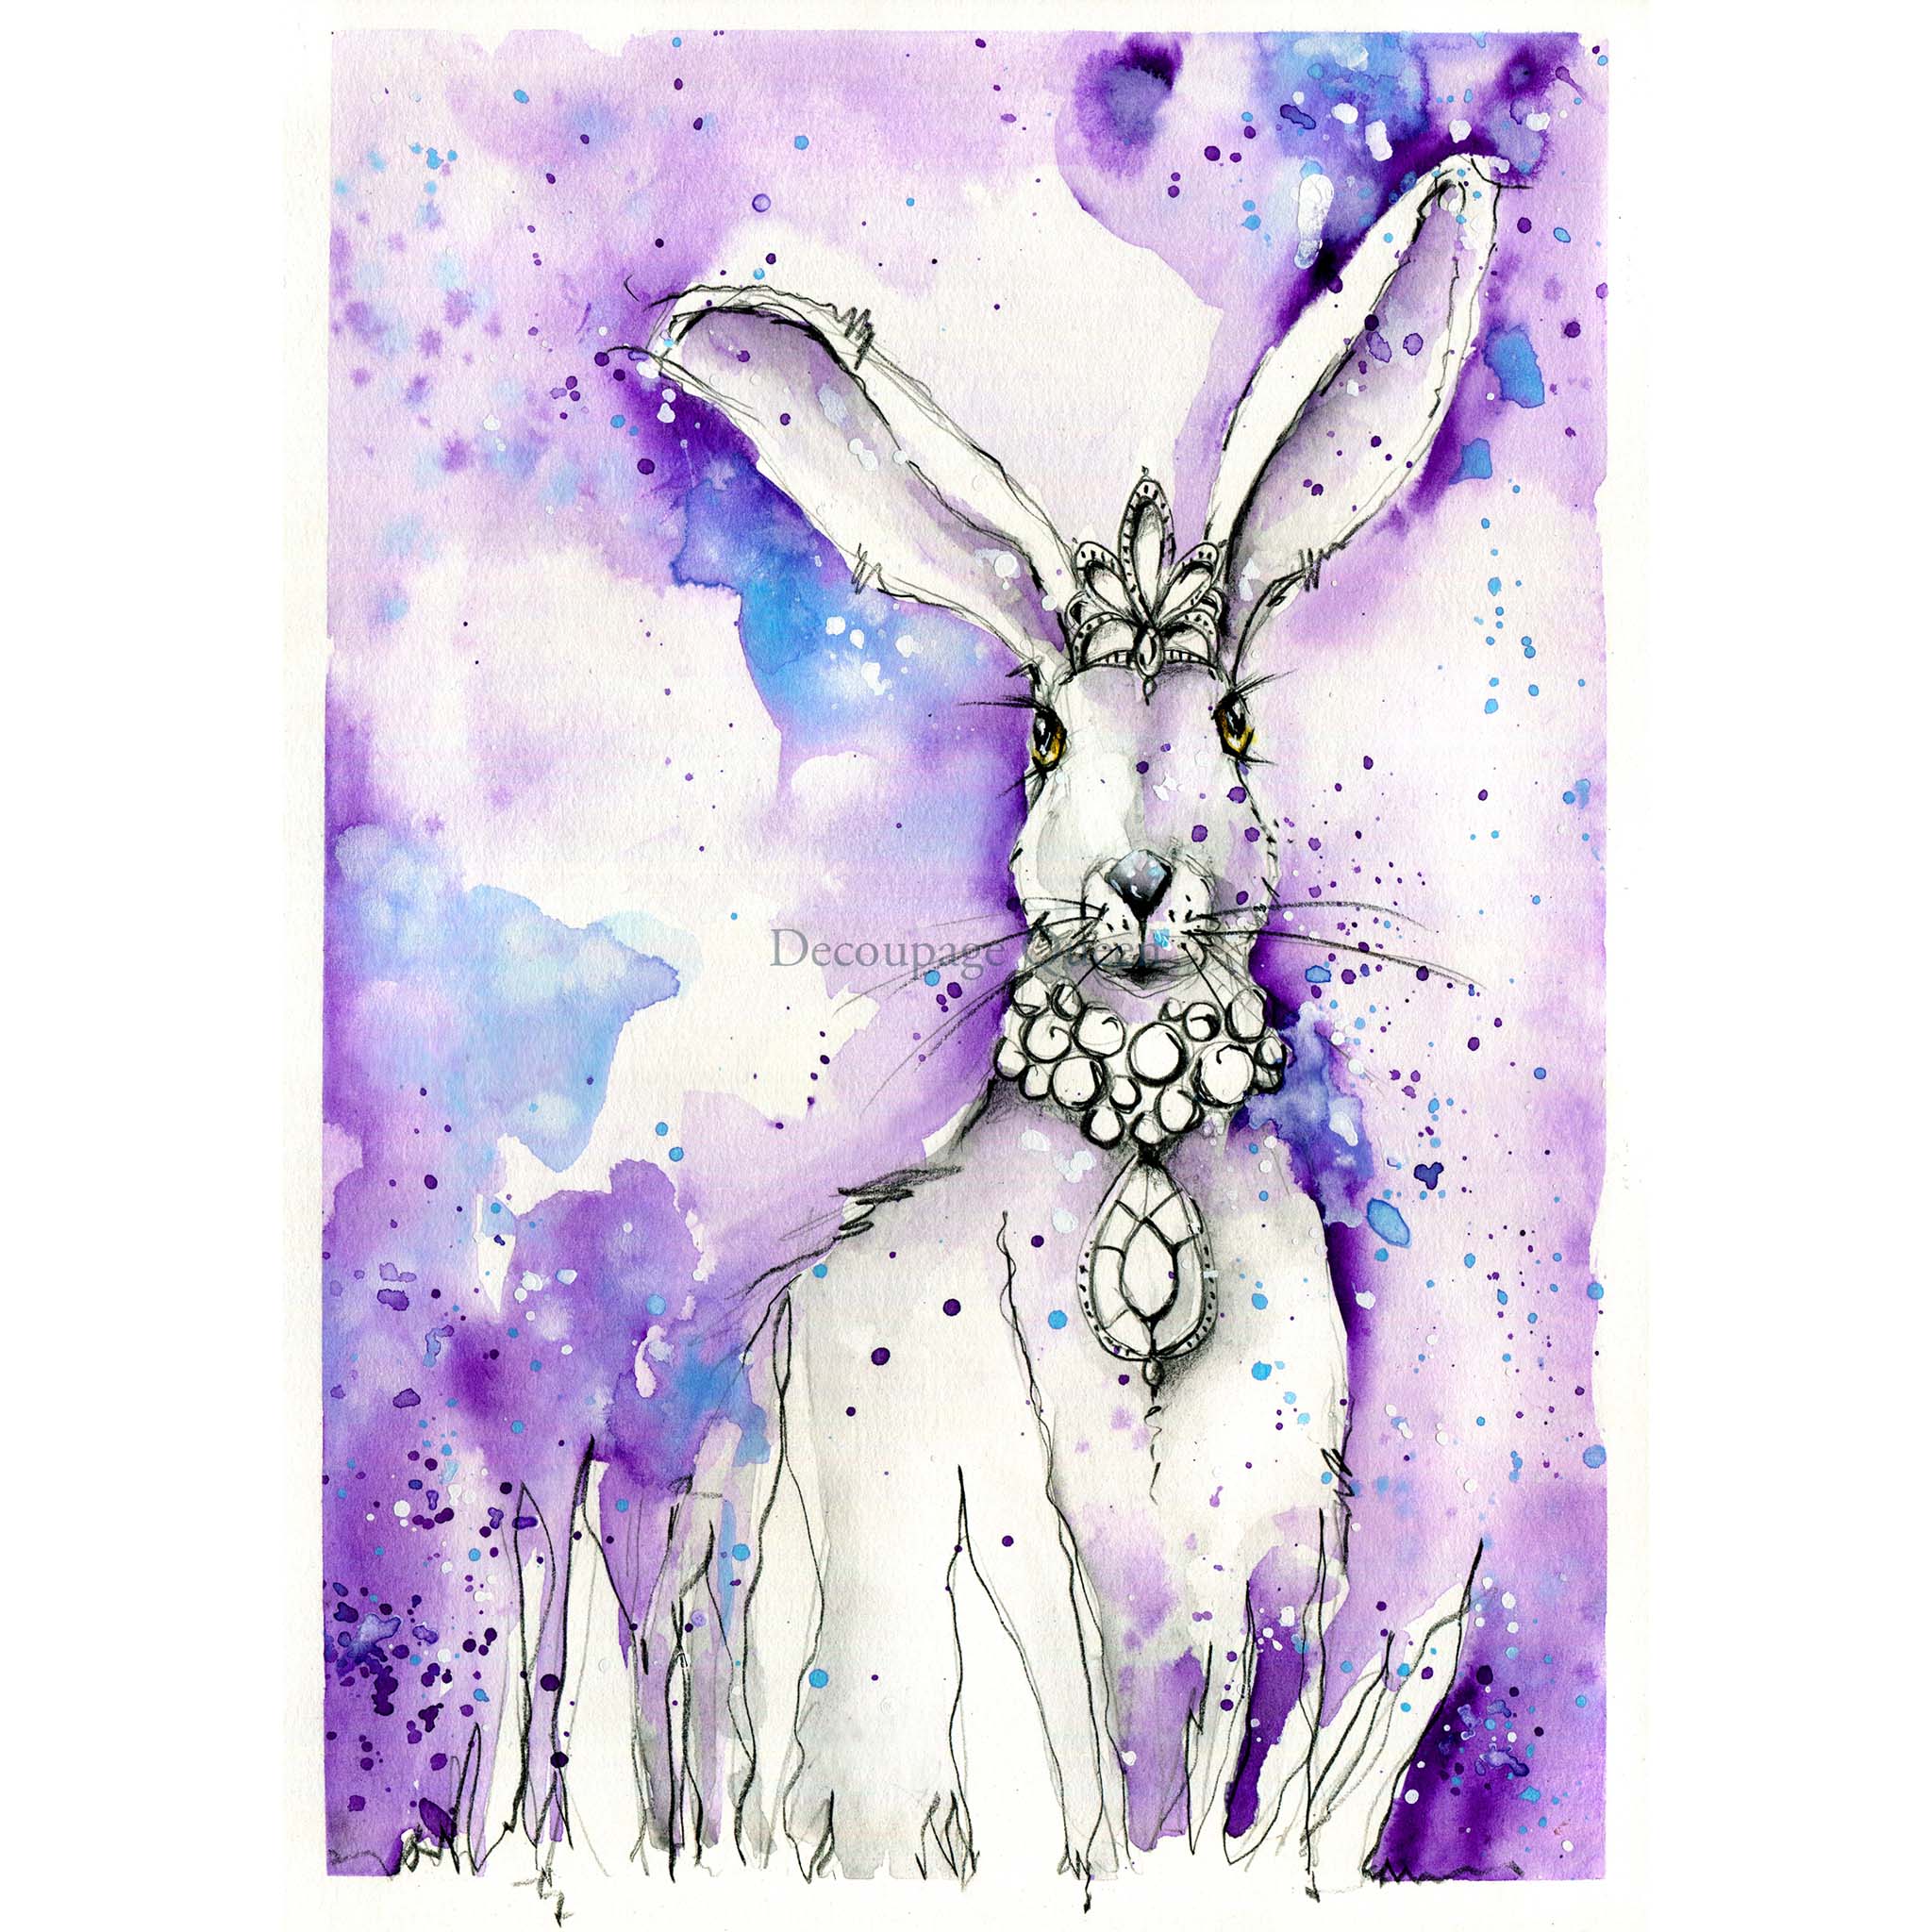 A4 rice paper design featuring a beautiful purple watercolor background adorned with a charming white rabbit wearing a crown and a dazzling jewel necklace is against a white background.